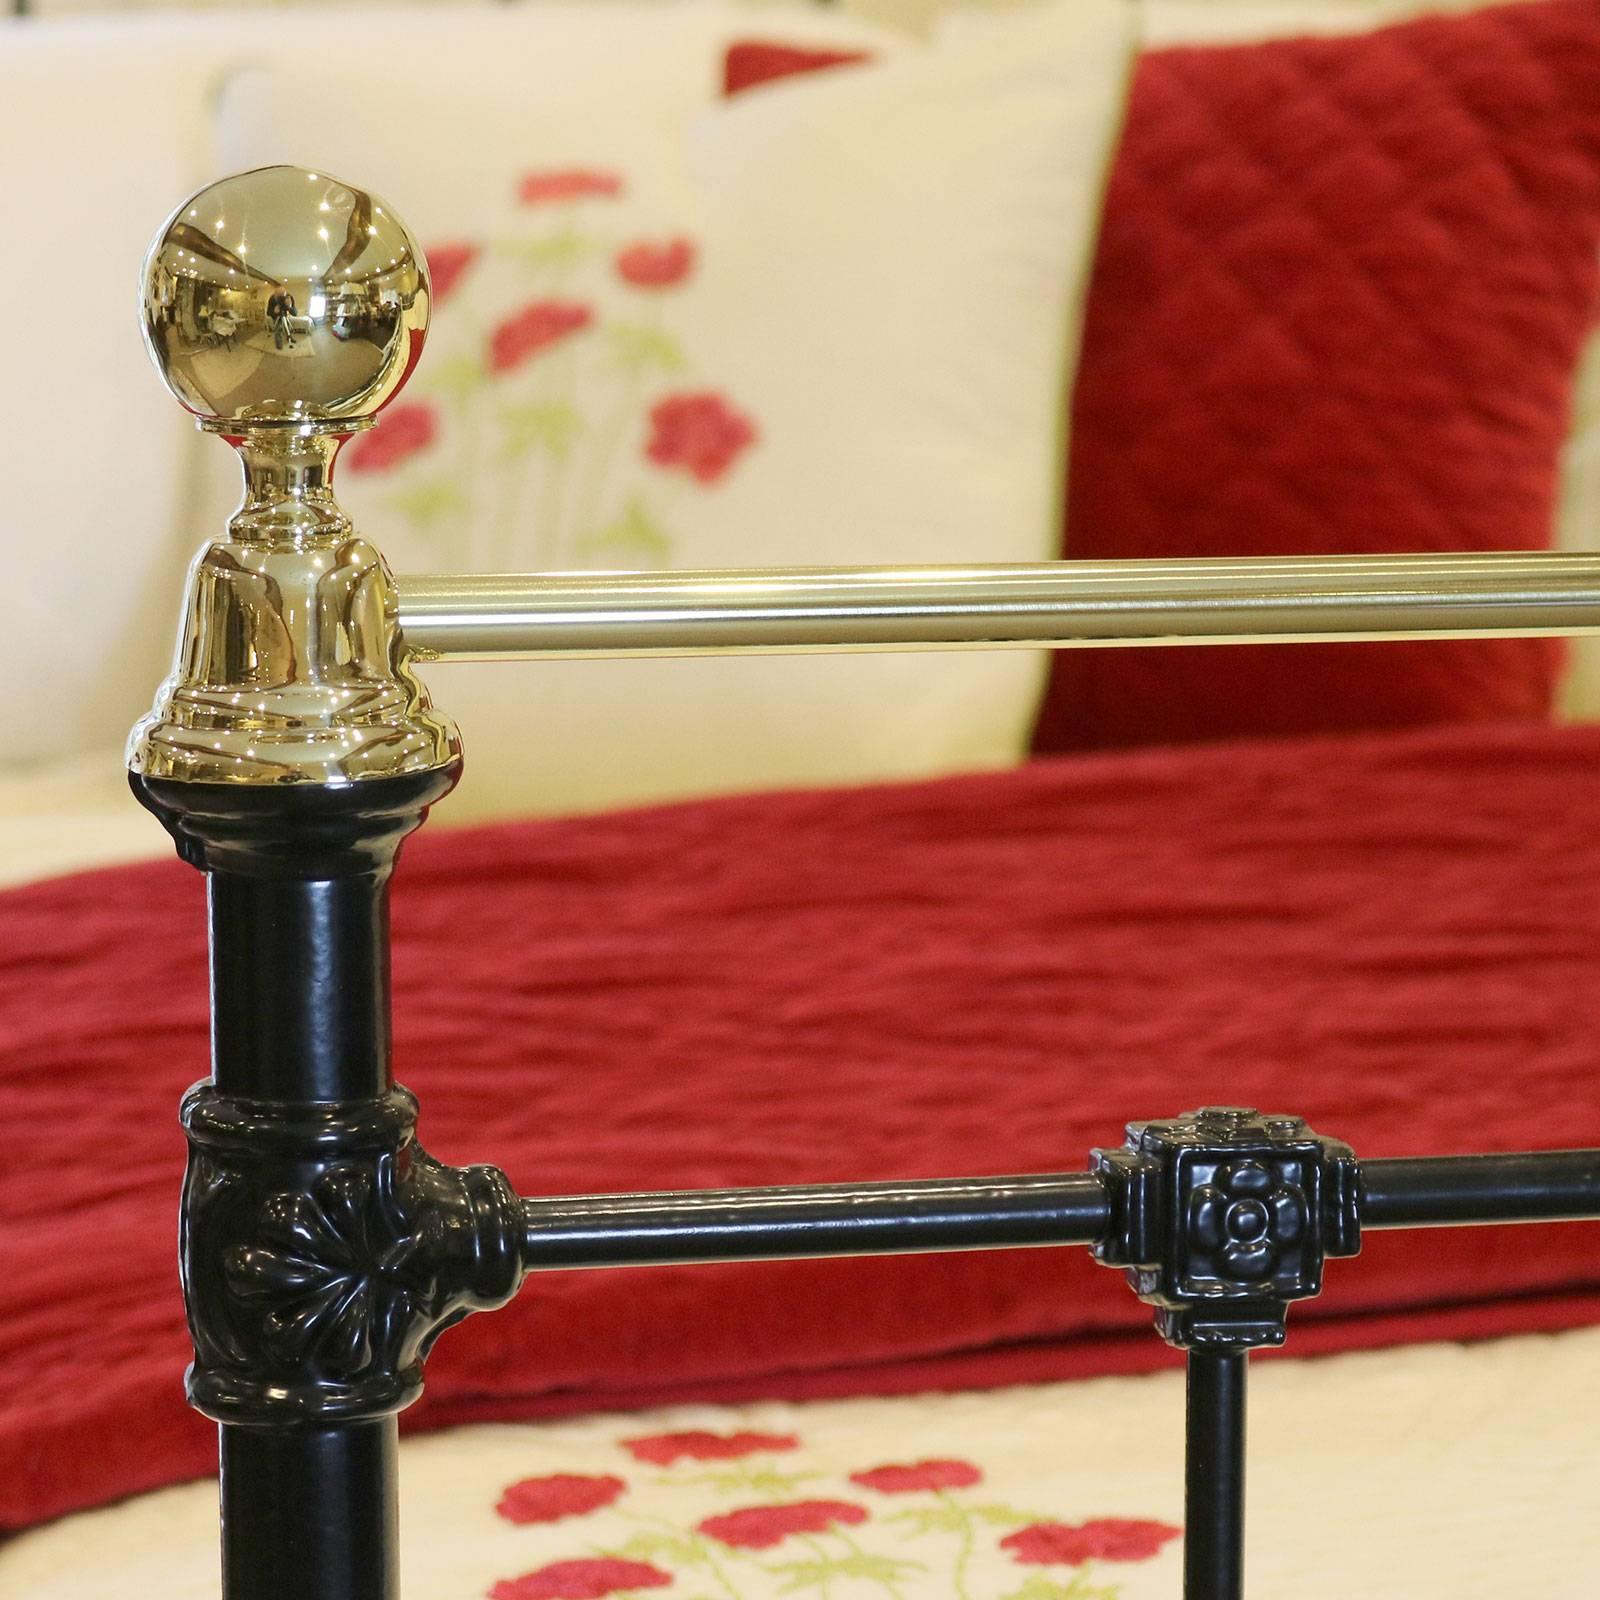 English Brass and Iron Bed in Black, MK89